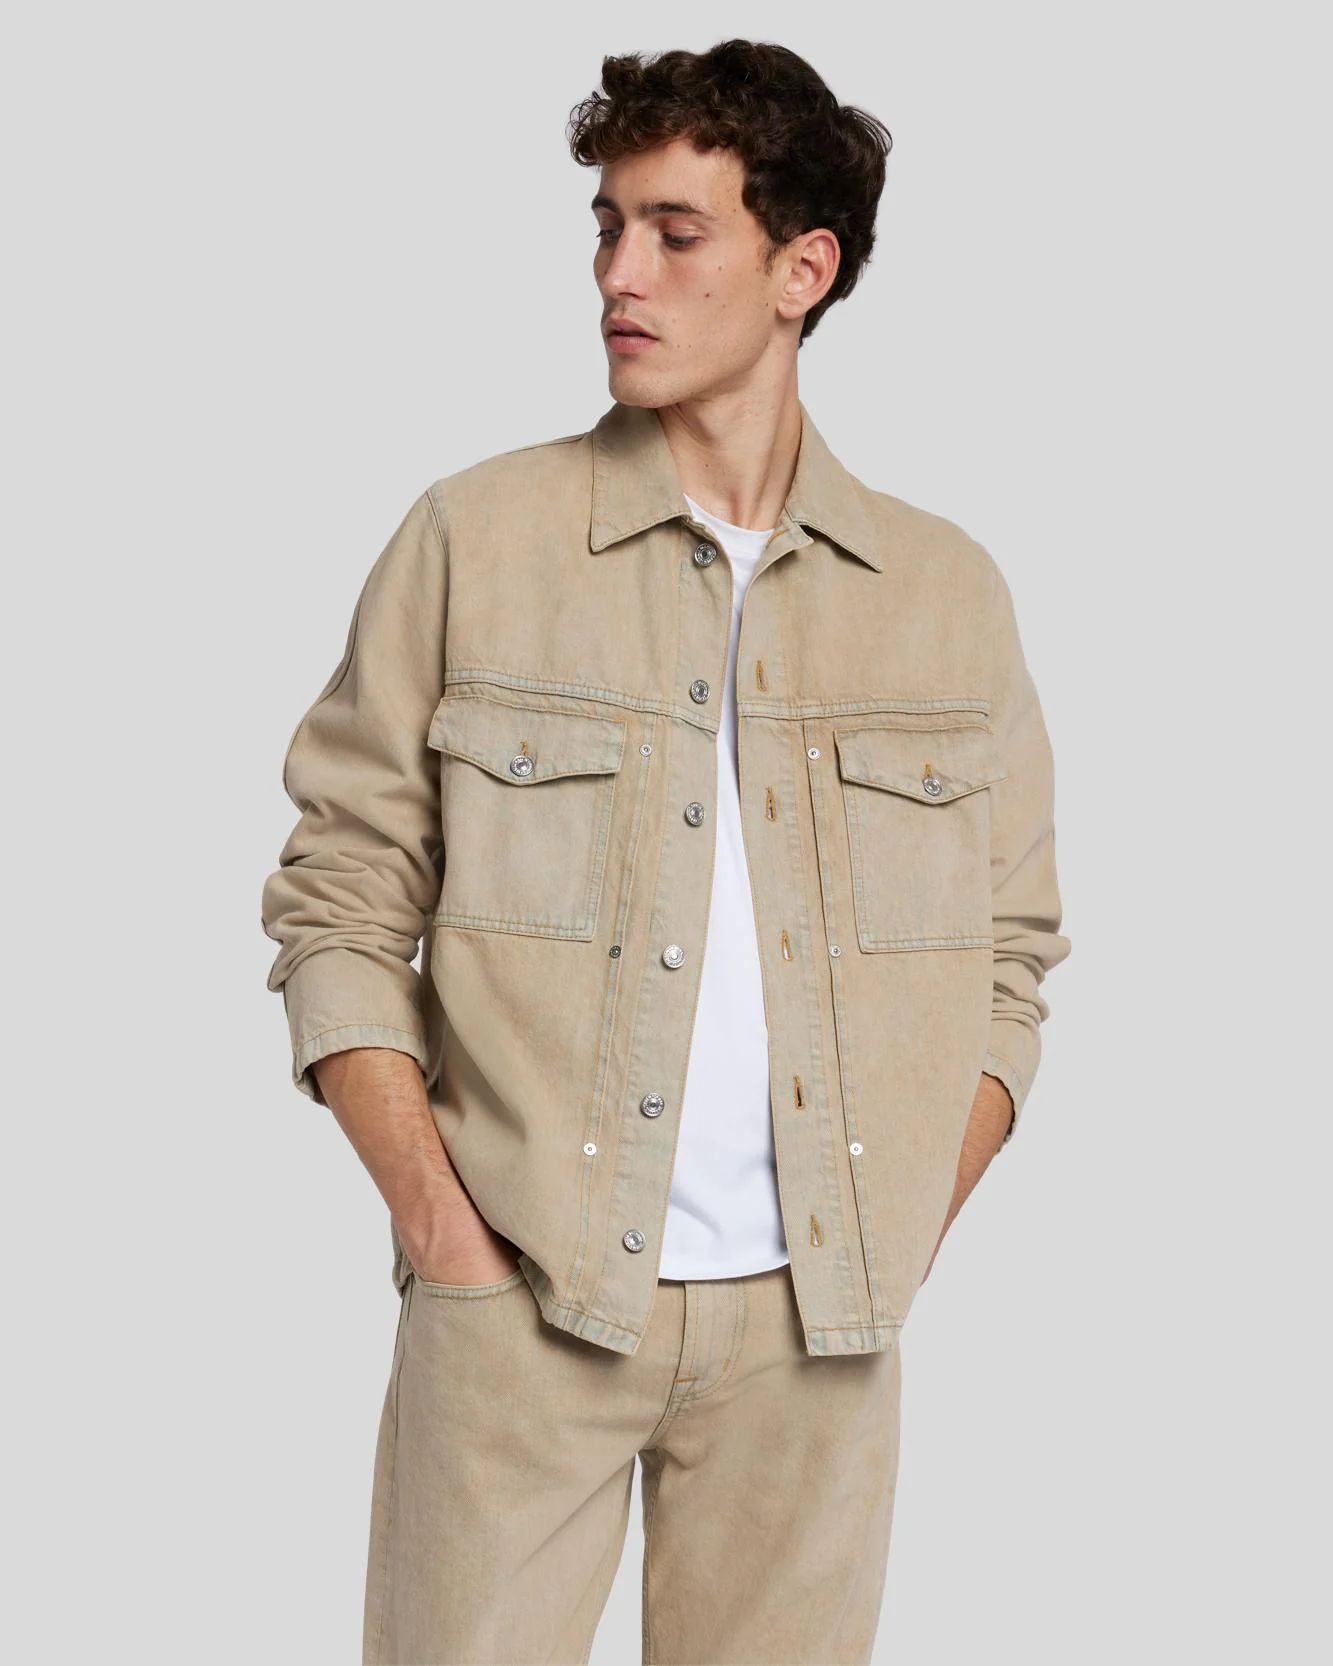 Pleated Overshirt in Earth | 7 For All Mankind